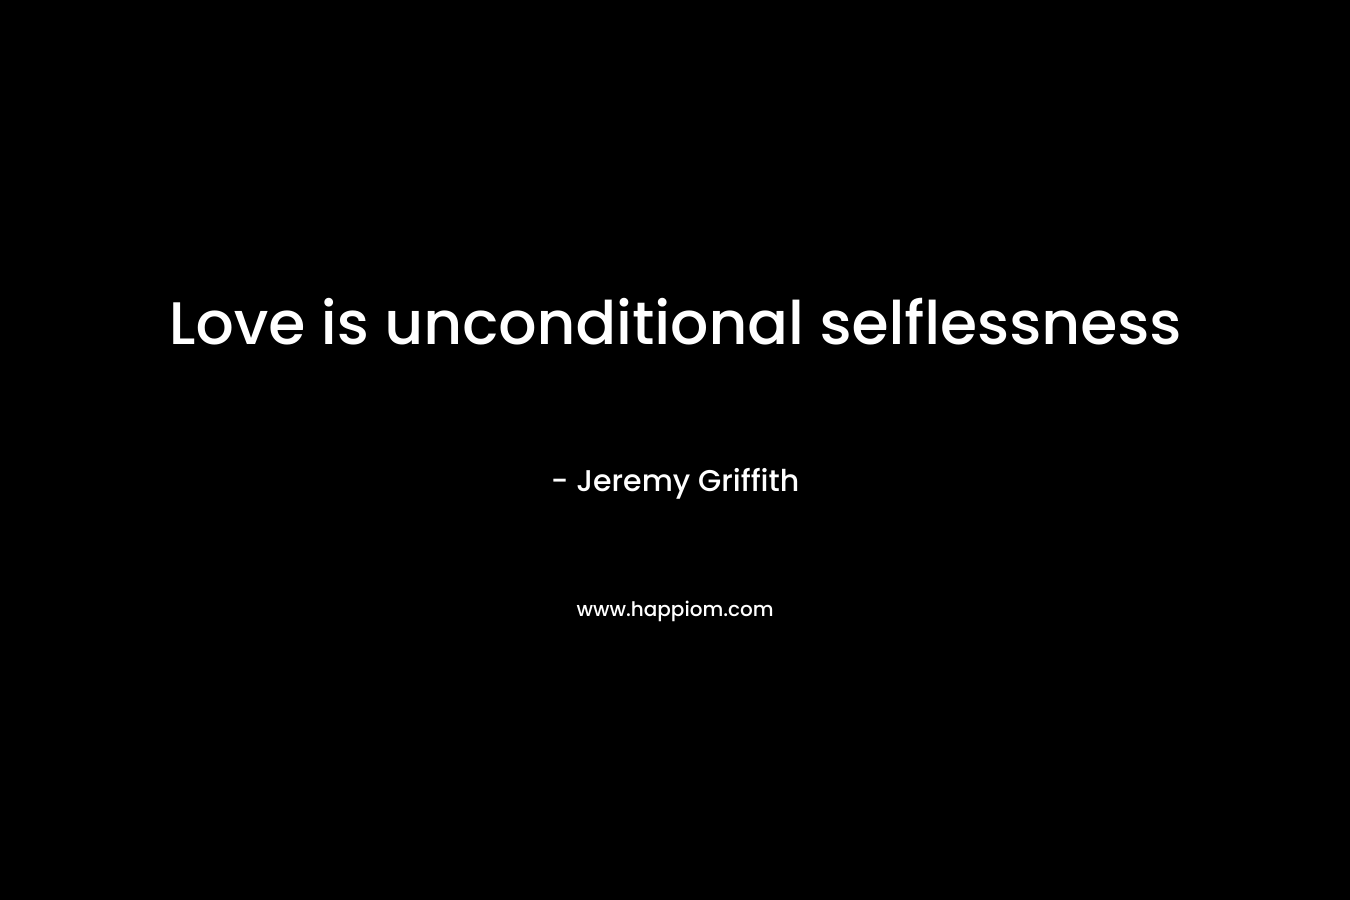 Love is unconditional selflessness